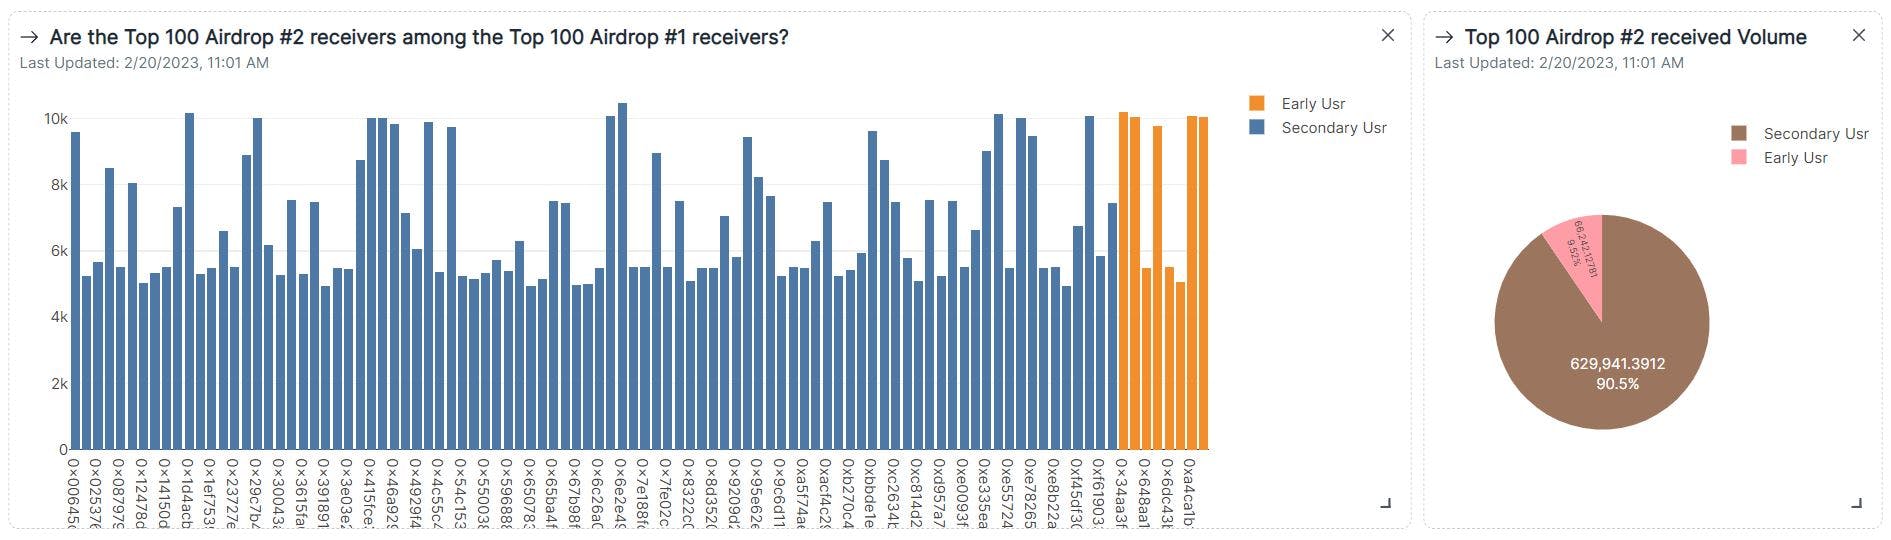 Overlapping of two airdrop top 100 receivers